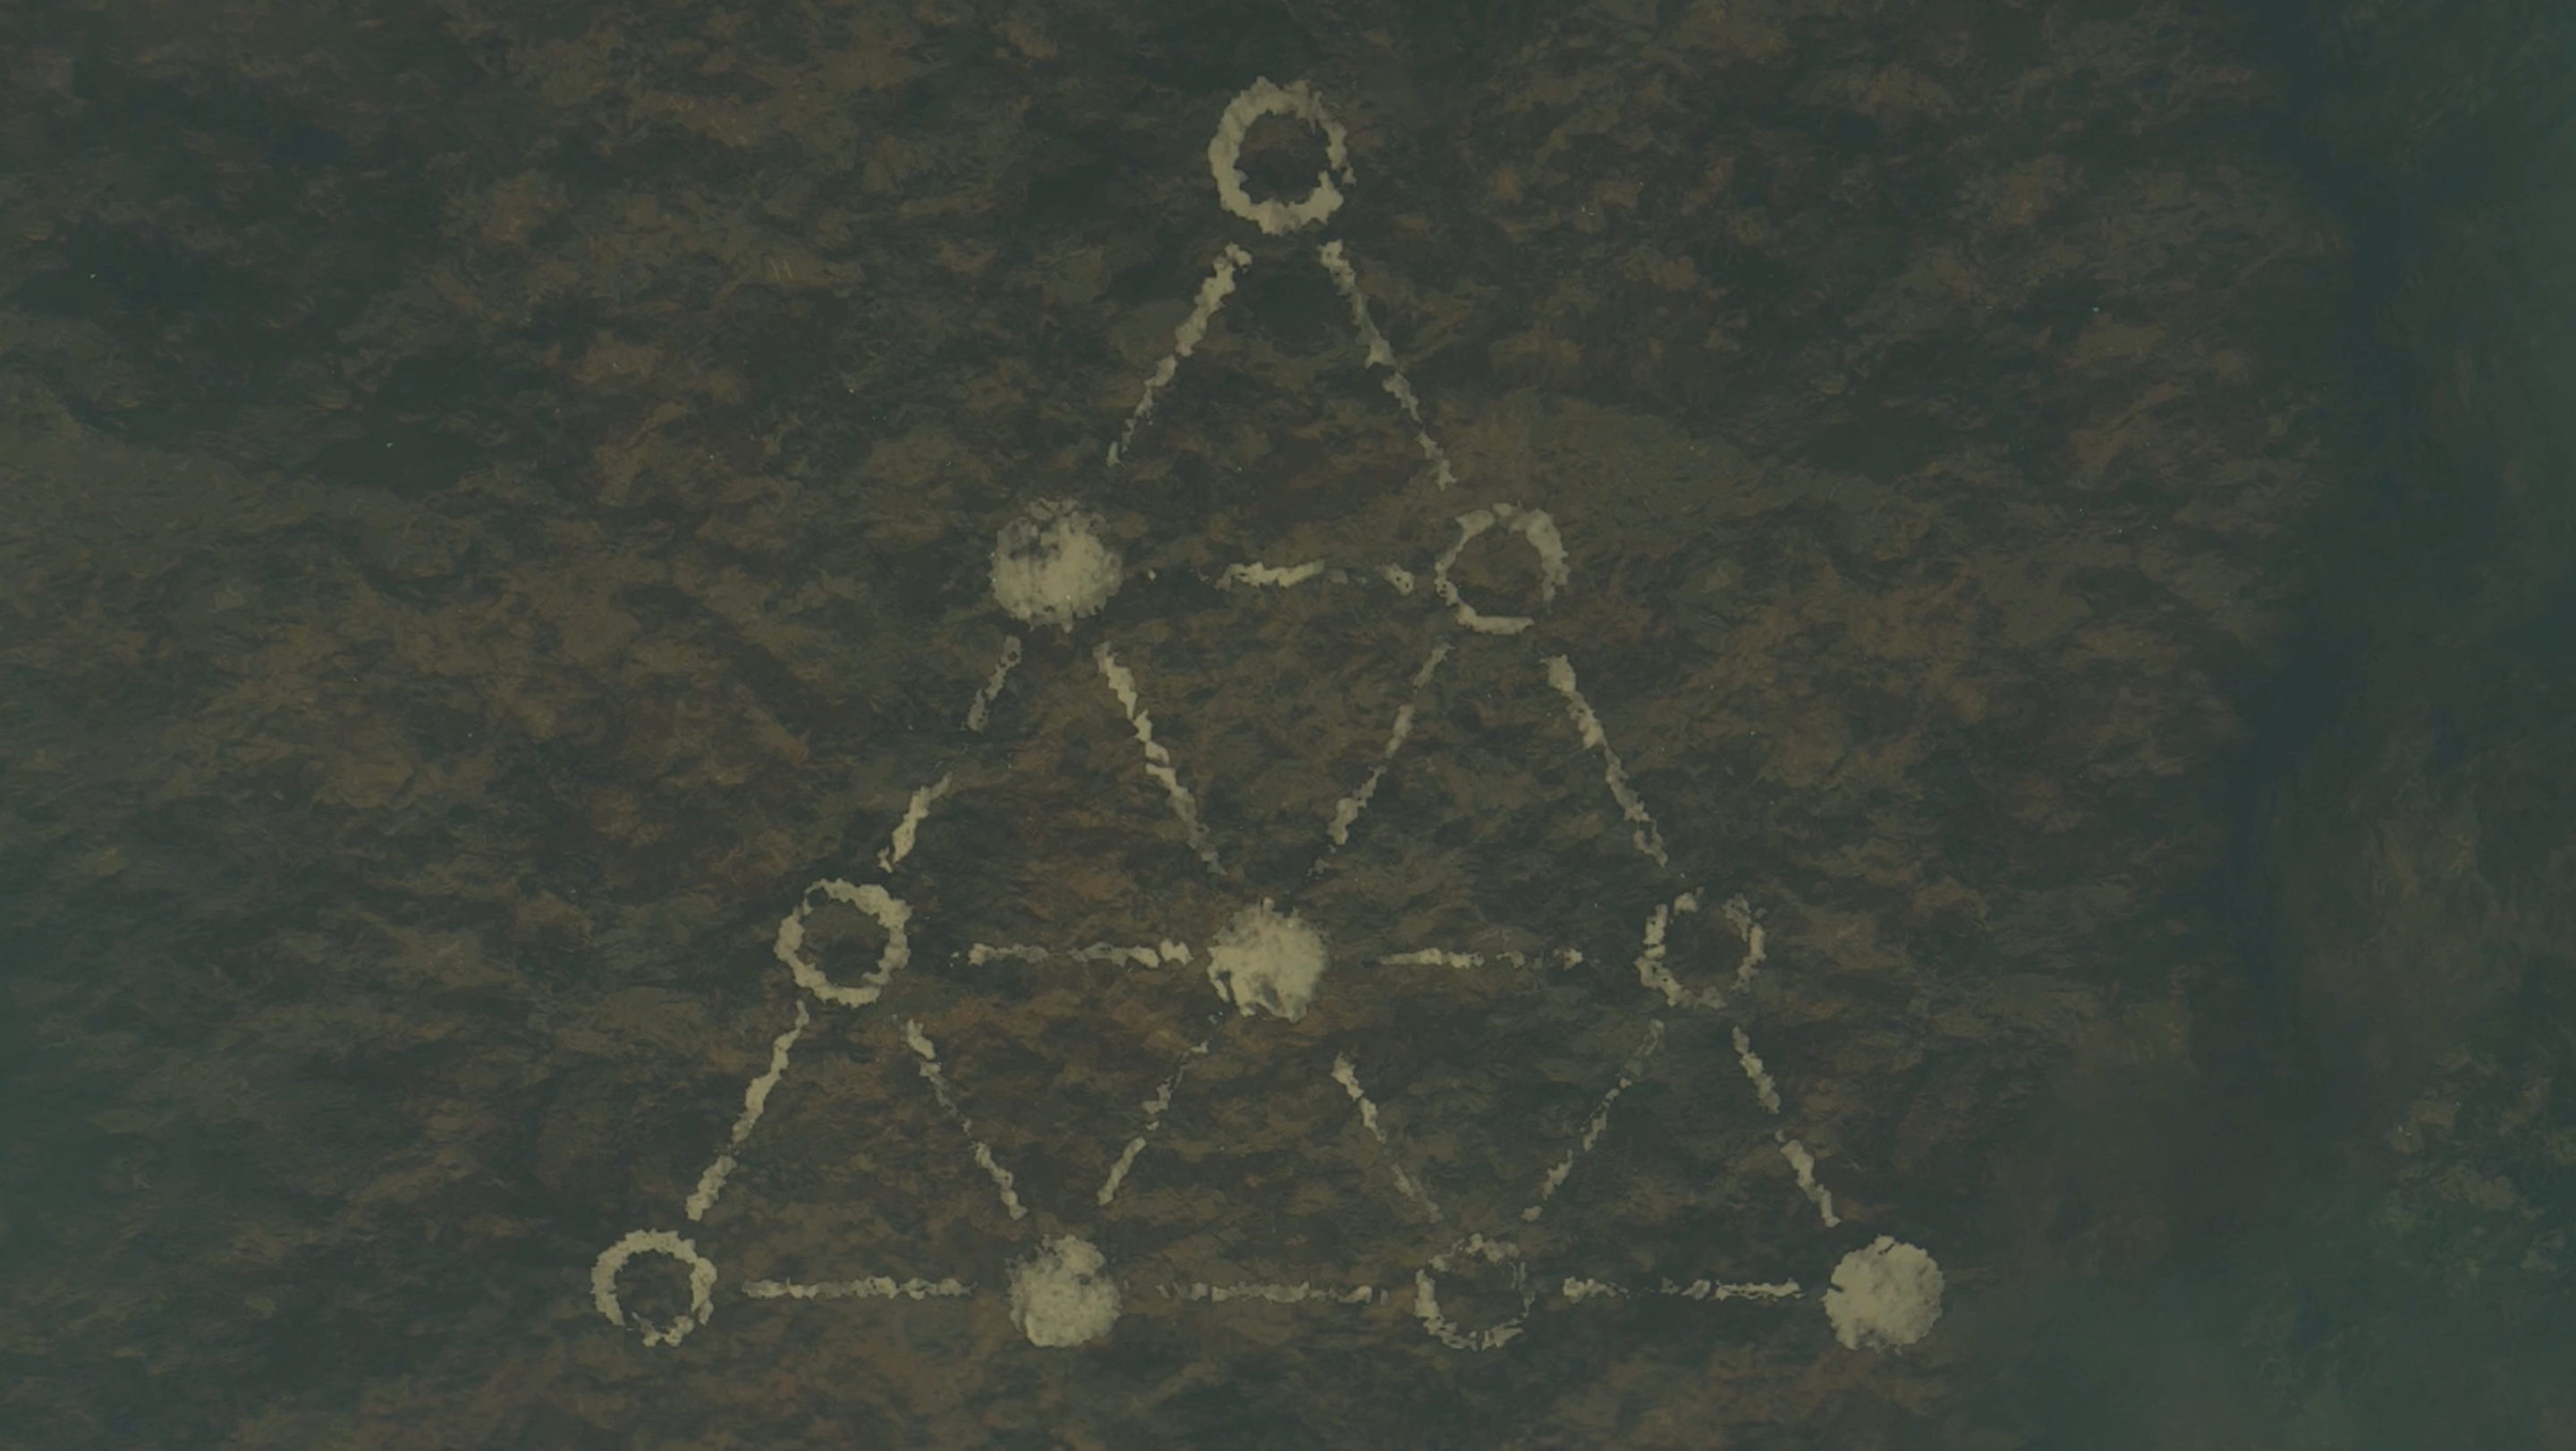 The Legend of Zelda: Tears of the Kingdom Dueling Peaks South Cave puzzle solution on the ceiling of the Dueling Peaks North Cave